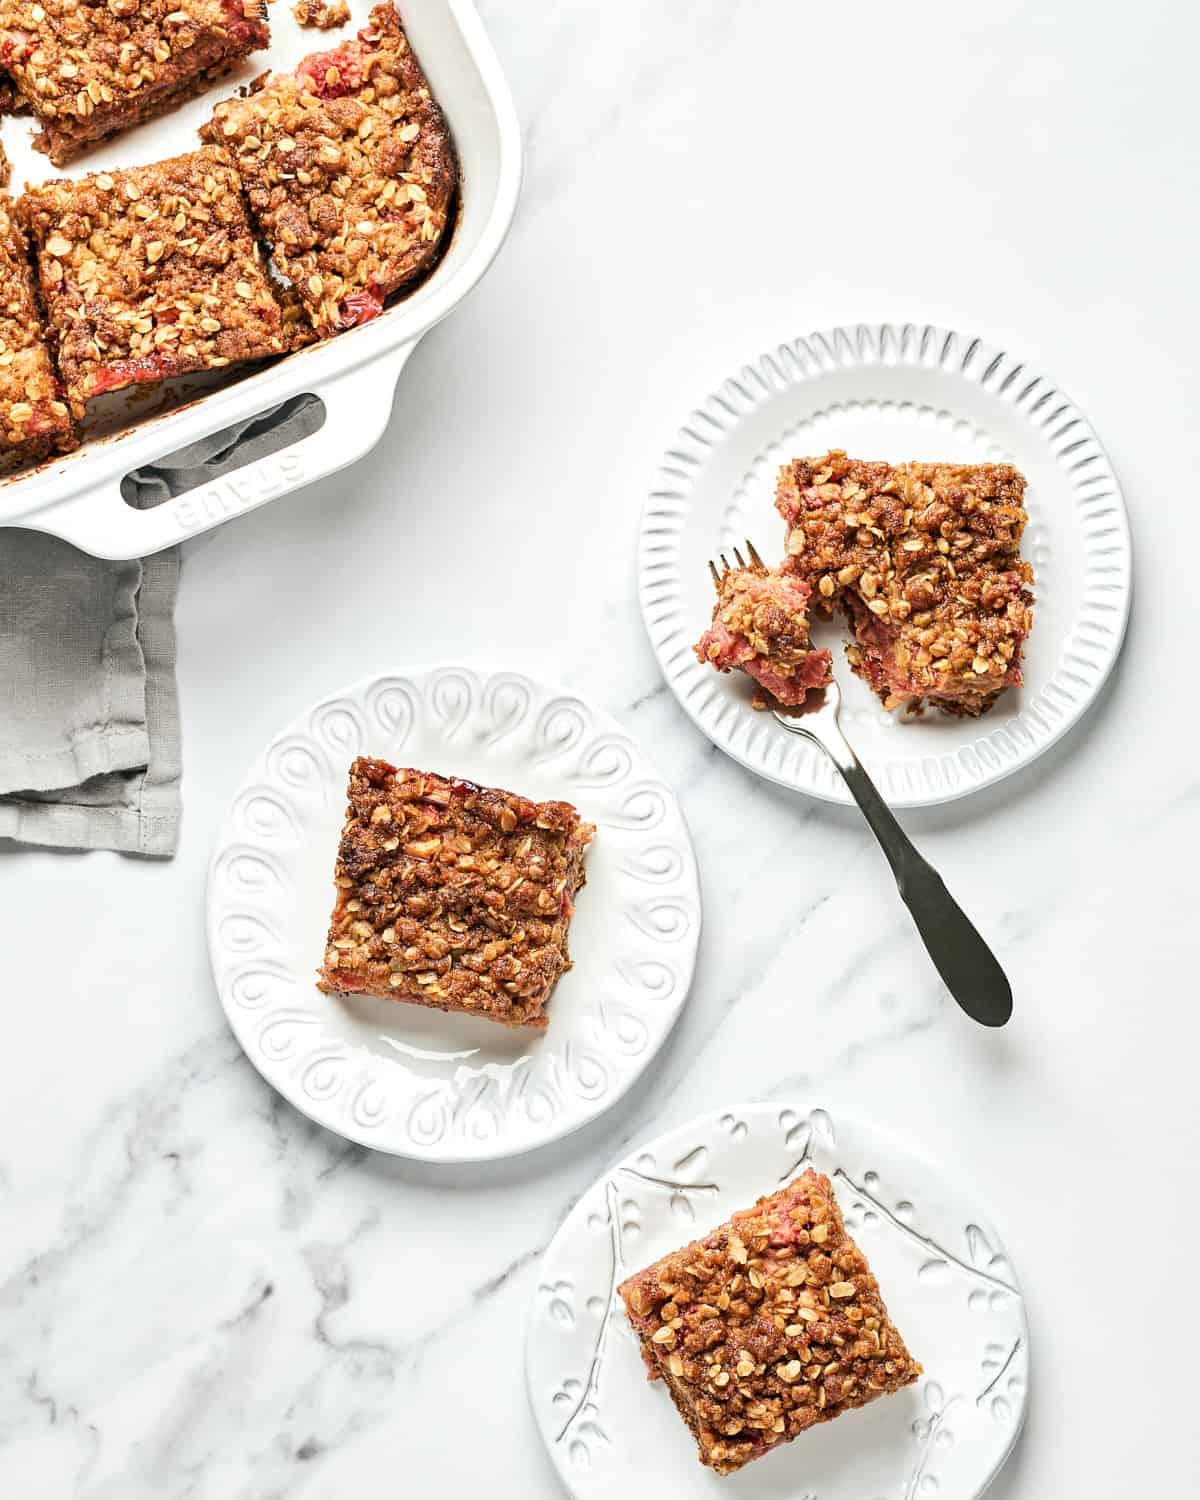 Overhead view of three plates of Vegan Strawberry Rhubarb Crumble Bars with a grey napkin and baking dish nearby.